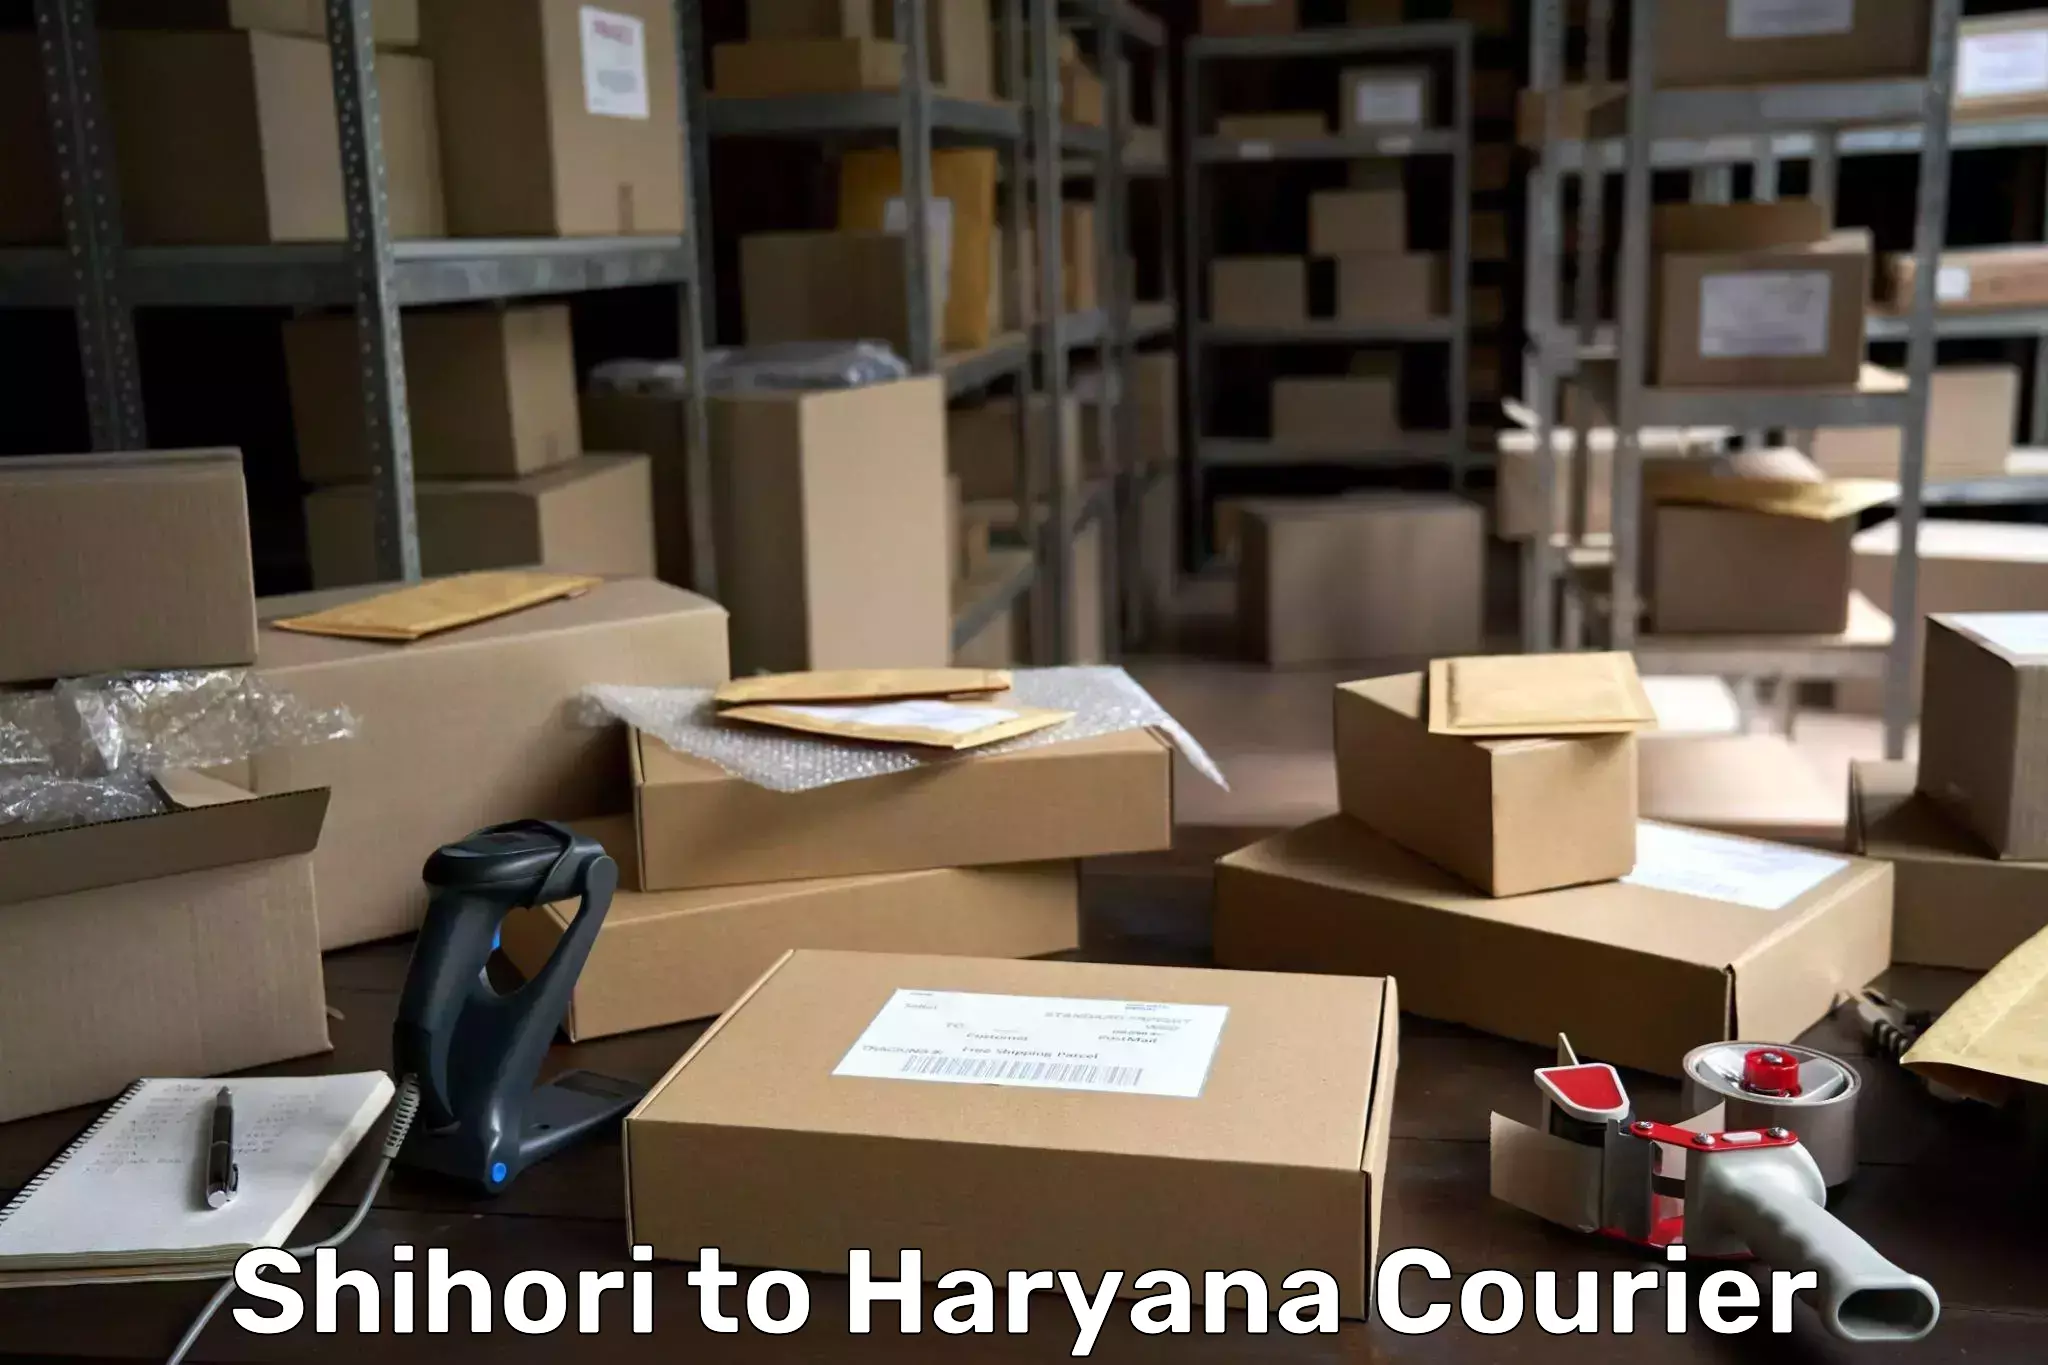 Express package services Shihori to Haryana